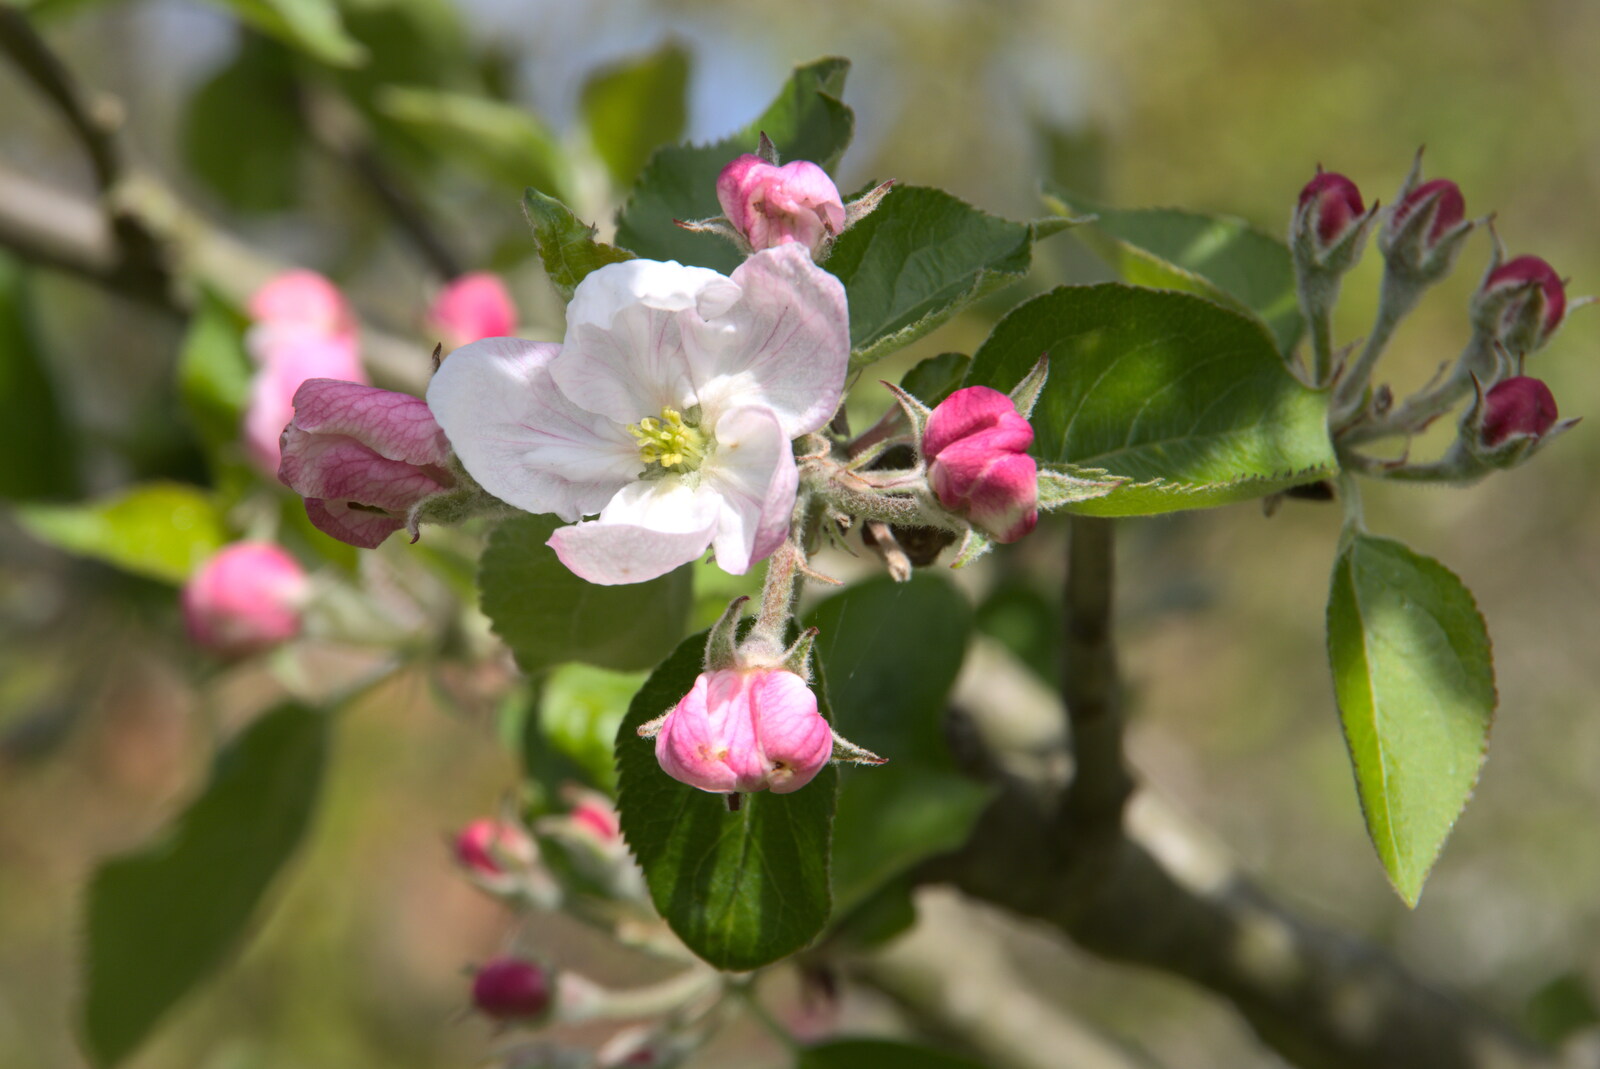 The apples are in blossom from A Weekend Camping Trip in the Garden, Brome, Suffolk - 11th April 2020